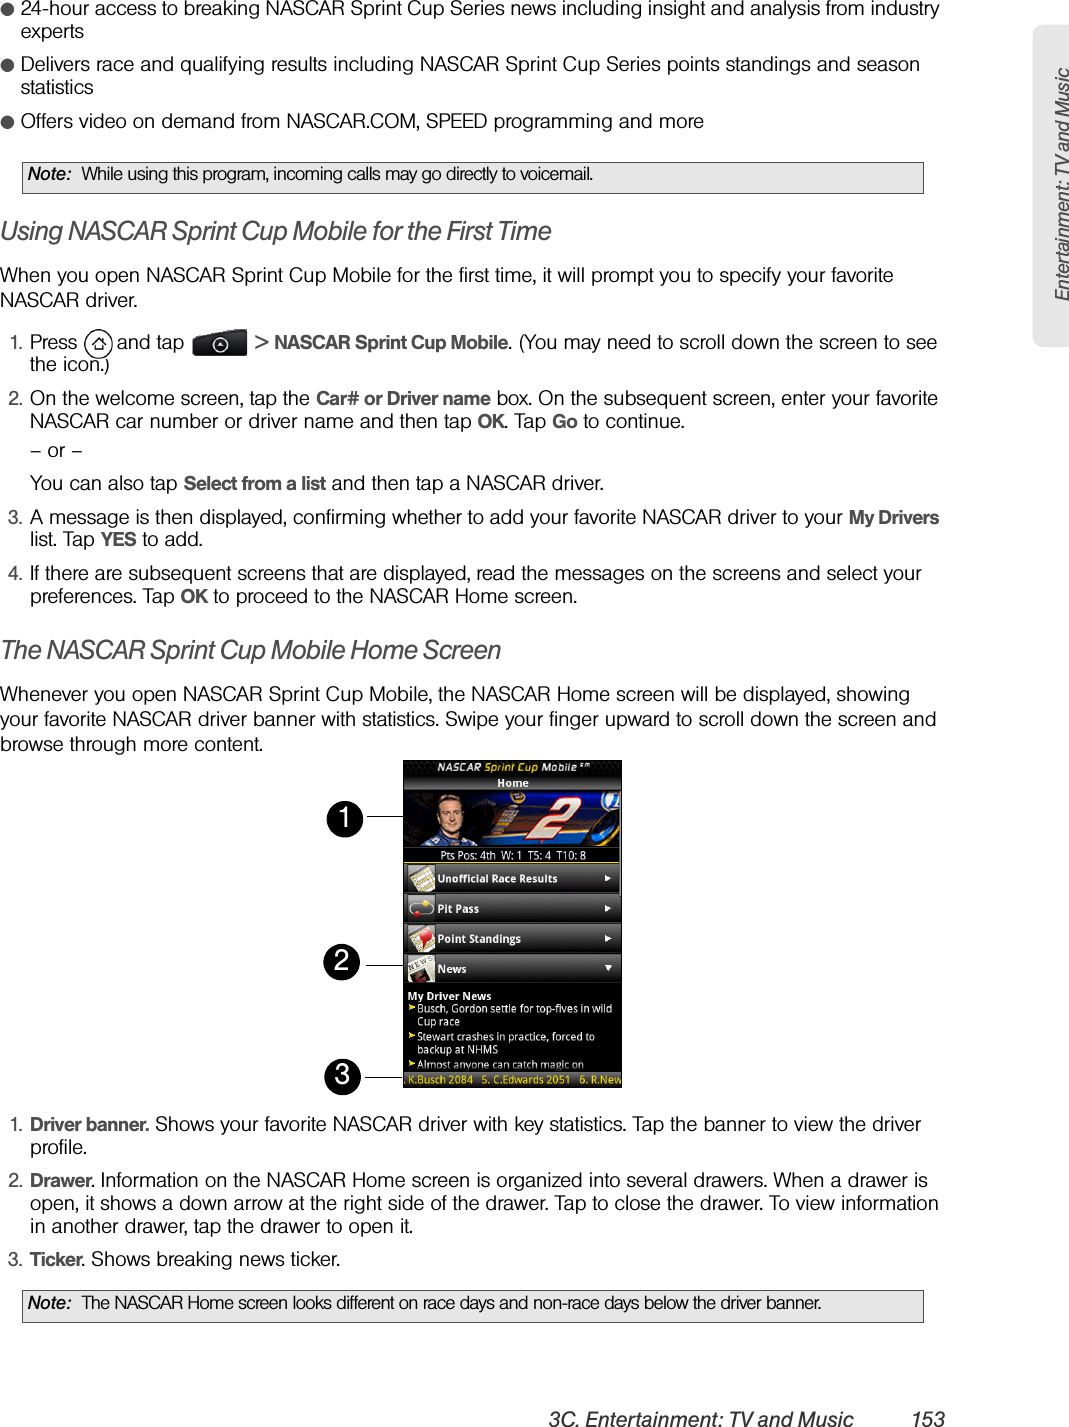 Entertainment: TV and Music3C. Entertainment: TV and Music 153ⅷ24-hour access to breaking NASCAR Sprint Cup Series news including insight and analysis from industry expertsⅷDelivers race and qualifying results including NASCAR Sprint Cup Series points standings and season statisticsⅷOffers video on demand from NASCAR.COM, SPEED programming and moreUsing NASCAR Sprint Cup Mobile for the First TimeWhen you open NASCAR Sprint Cup Mobile for the first time, it will prompt you to specify your favorite NASCAR driver.1. Press   and tap   &gt; NASCAR Sprint Cup Mobile. (You may need to scroll down the screen to see the icon.)2. On the welcome screen, tap the Car# or Driver name box. On the subsequent screen, enter your favorite NASCAR car number or driver name and then tap OK. Tap Go to continue.– or –You can also tap Select from a list and then tap a NASCAR driver.3. A message is then displayed, confirming whether to add your favorite NASCAR driver to your My Drivers list. Tap YES to add.4. If there are subsequent screens that are displayed, read the messages on the screens and select your preferences. Tap OK to proceed to the NASCAR Home screen.The NASCAR Sprint Cup Mobile Home ScreenWhenever you open NASCAR Sprint Cup Mobile, the NASCAR Home screen will be displayed, showing your favorite NASCAR driver banner with statistics. Swipe your finger upward to scroll down the screen and browse through more content.     1. Driver banner. Shows your favorite NASCAR driver with key statistics. Tap the banner to view the driver profile.2. Drawer. Information on the NASCAR Home screen is organized into several drawers. When a drawer is open, it shows a down arrow at the right side of the drawer. Tap to close the drawer. To view information in another drawer, tap the drawer to open it.3. Ticker. Shows breaking news ticker.Note: While using this program, incoming calls may go directly to voicemail.Note: The NASCAR Home screen looks different on race days and non-race days below the driver banner.213